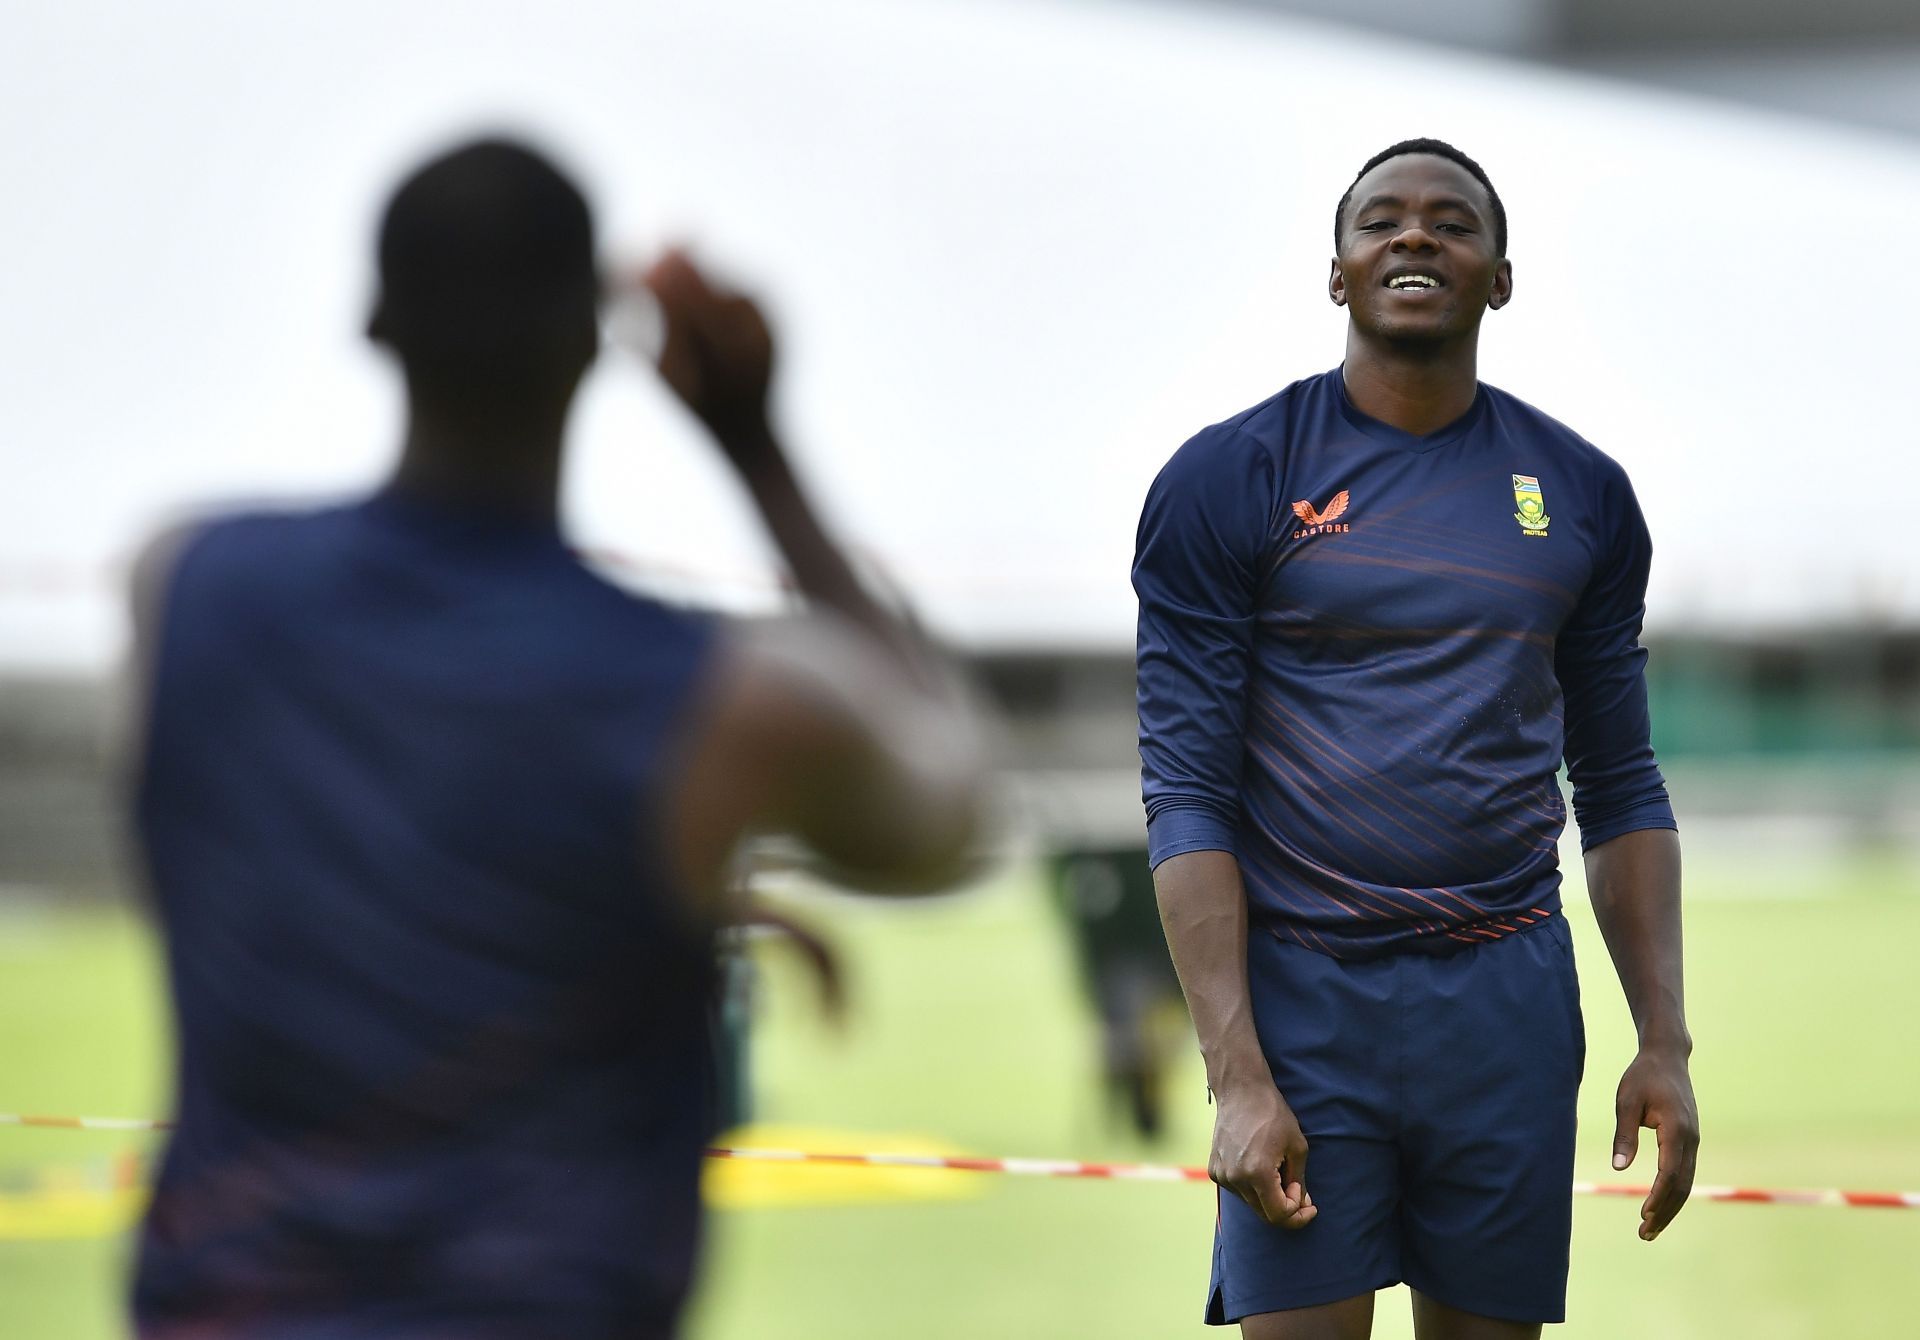 Kagiso Rabada will lead the attack for South Africa